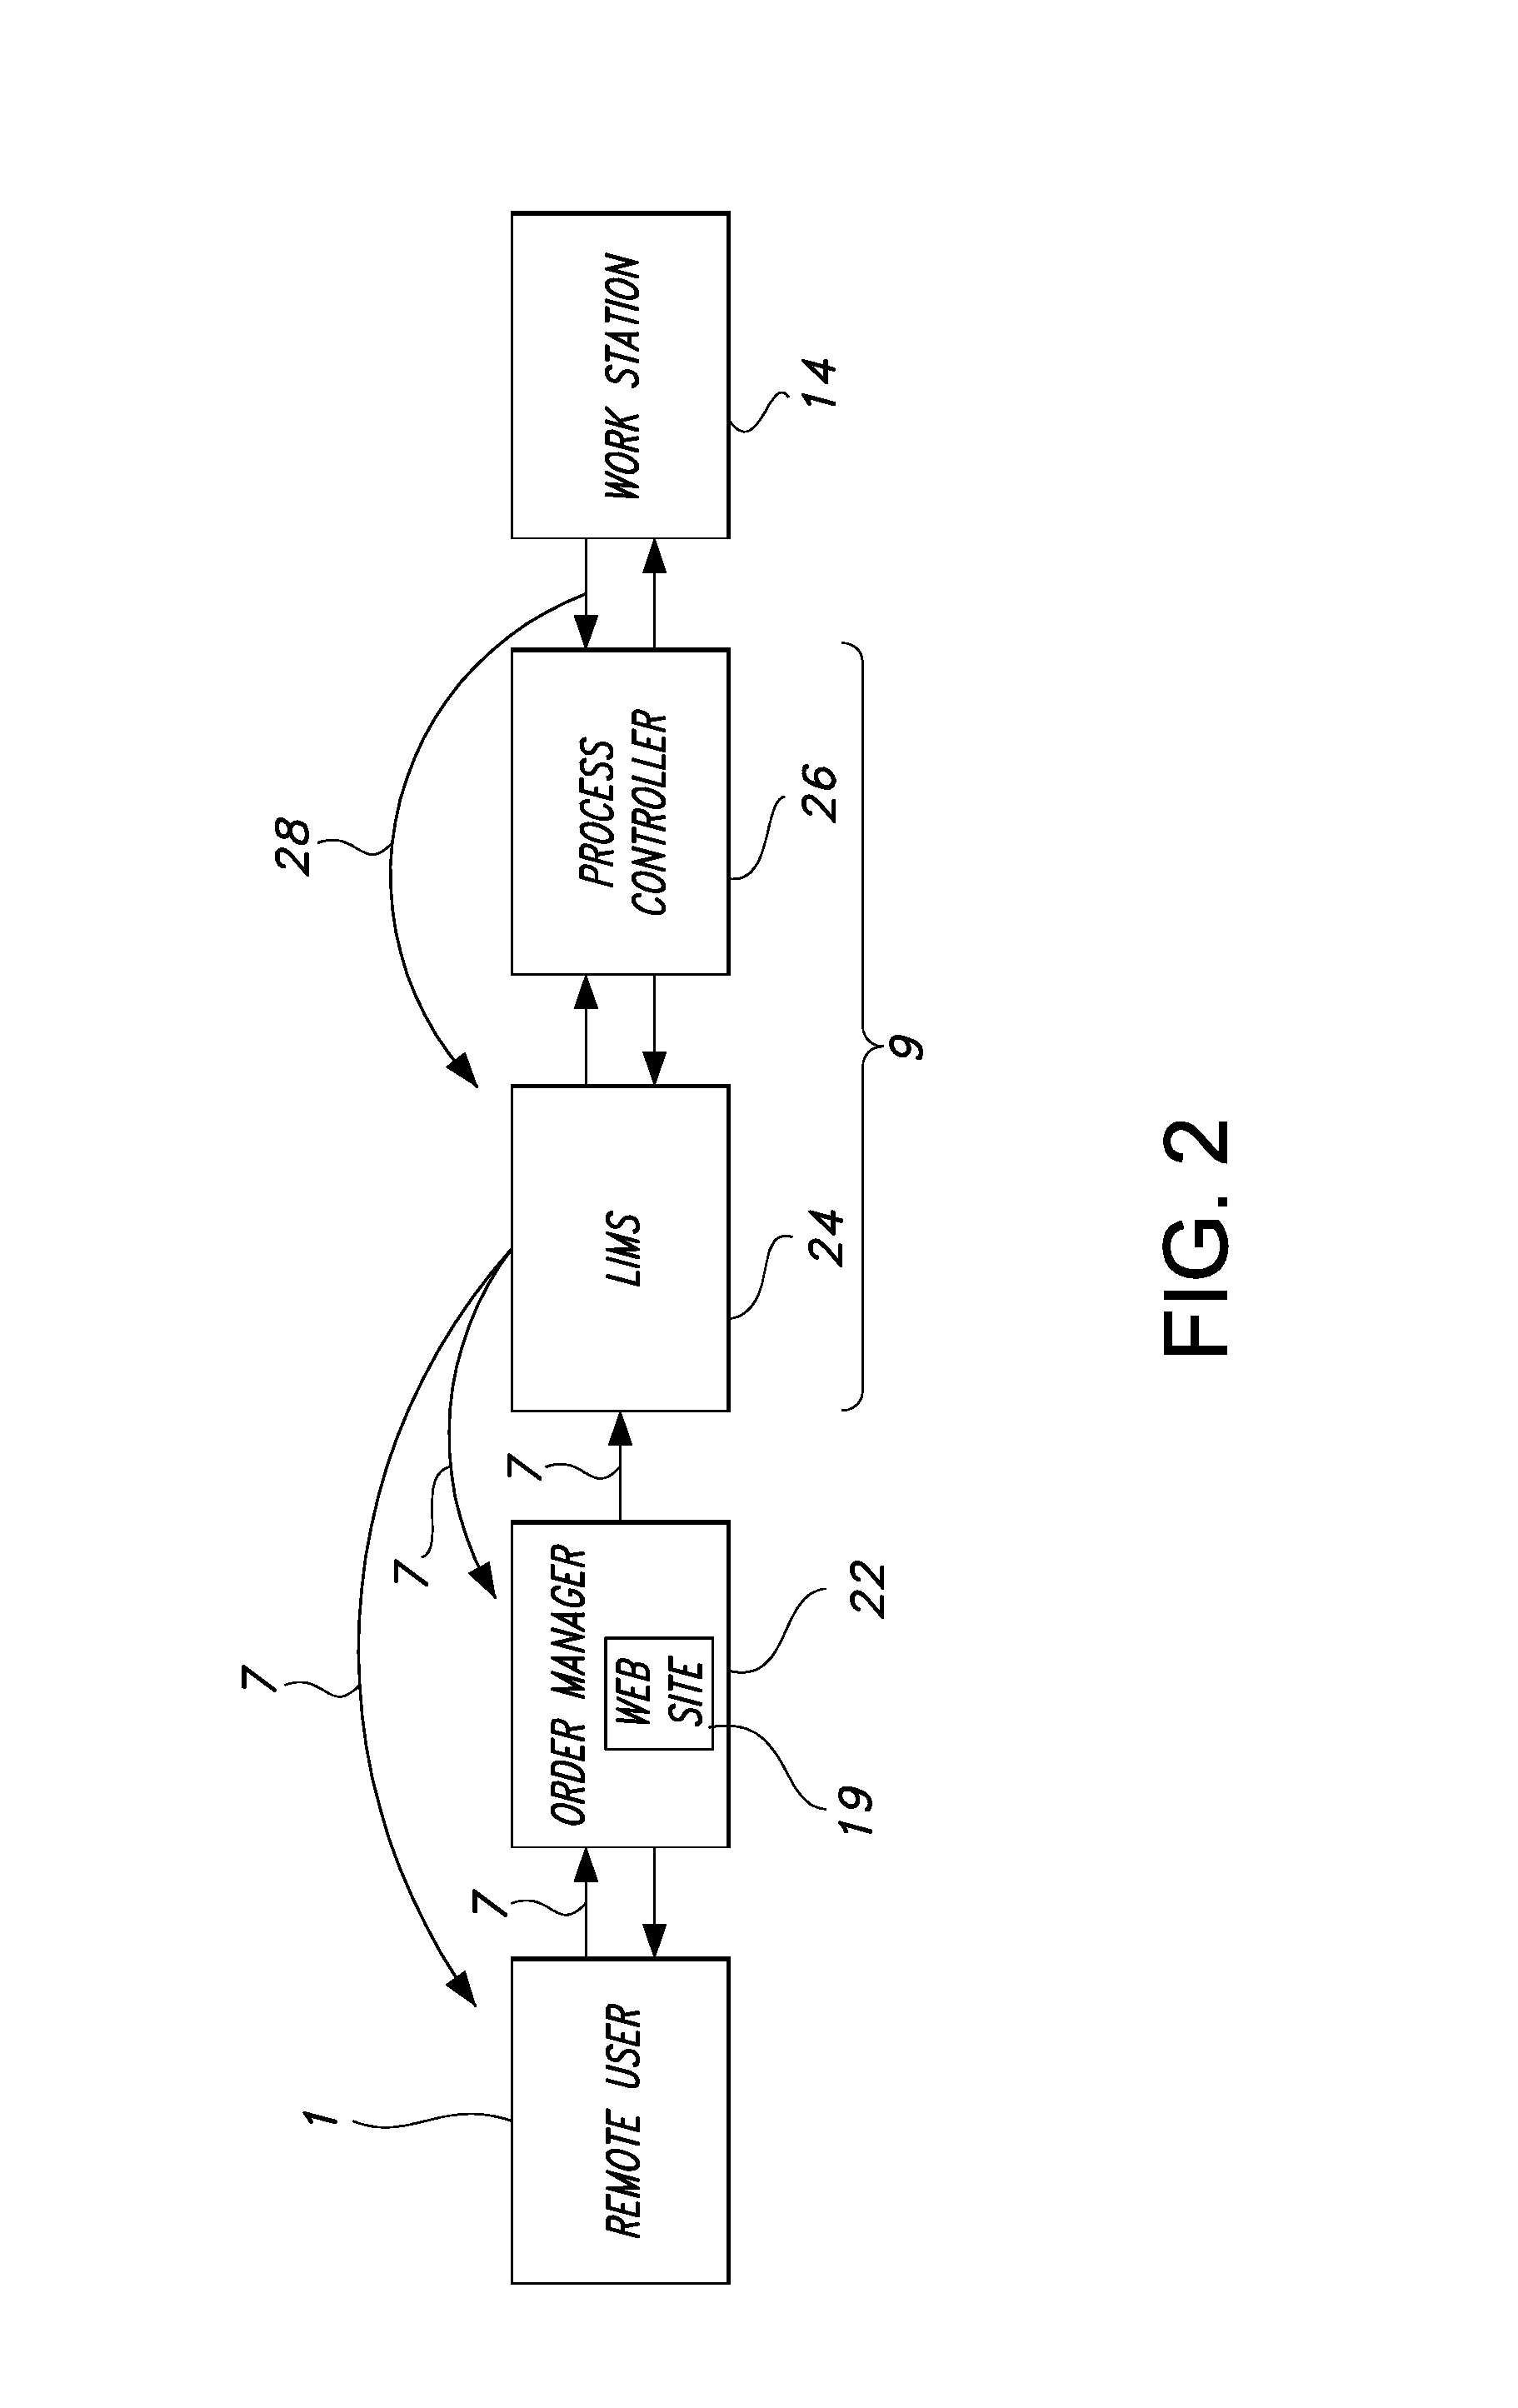 Method For Detecting at Least One Designated Genetic Sequence